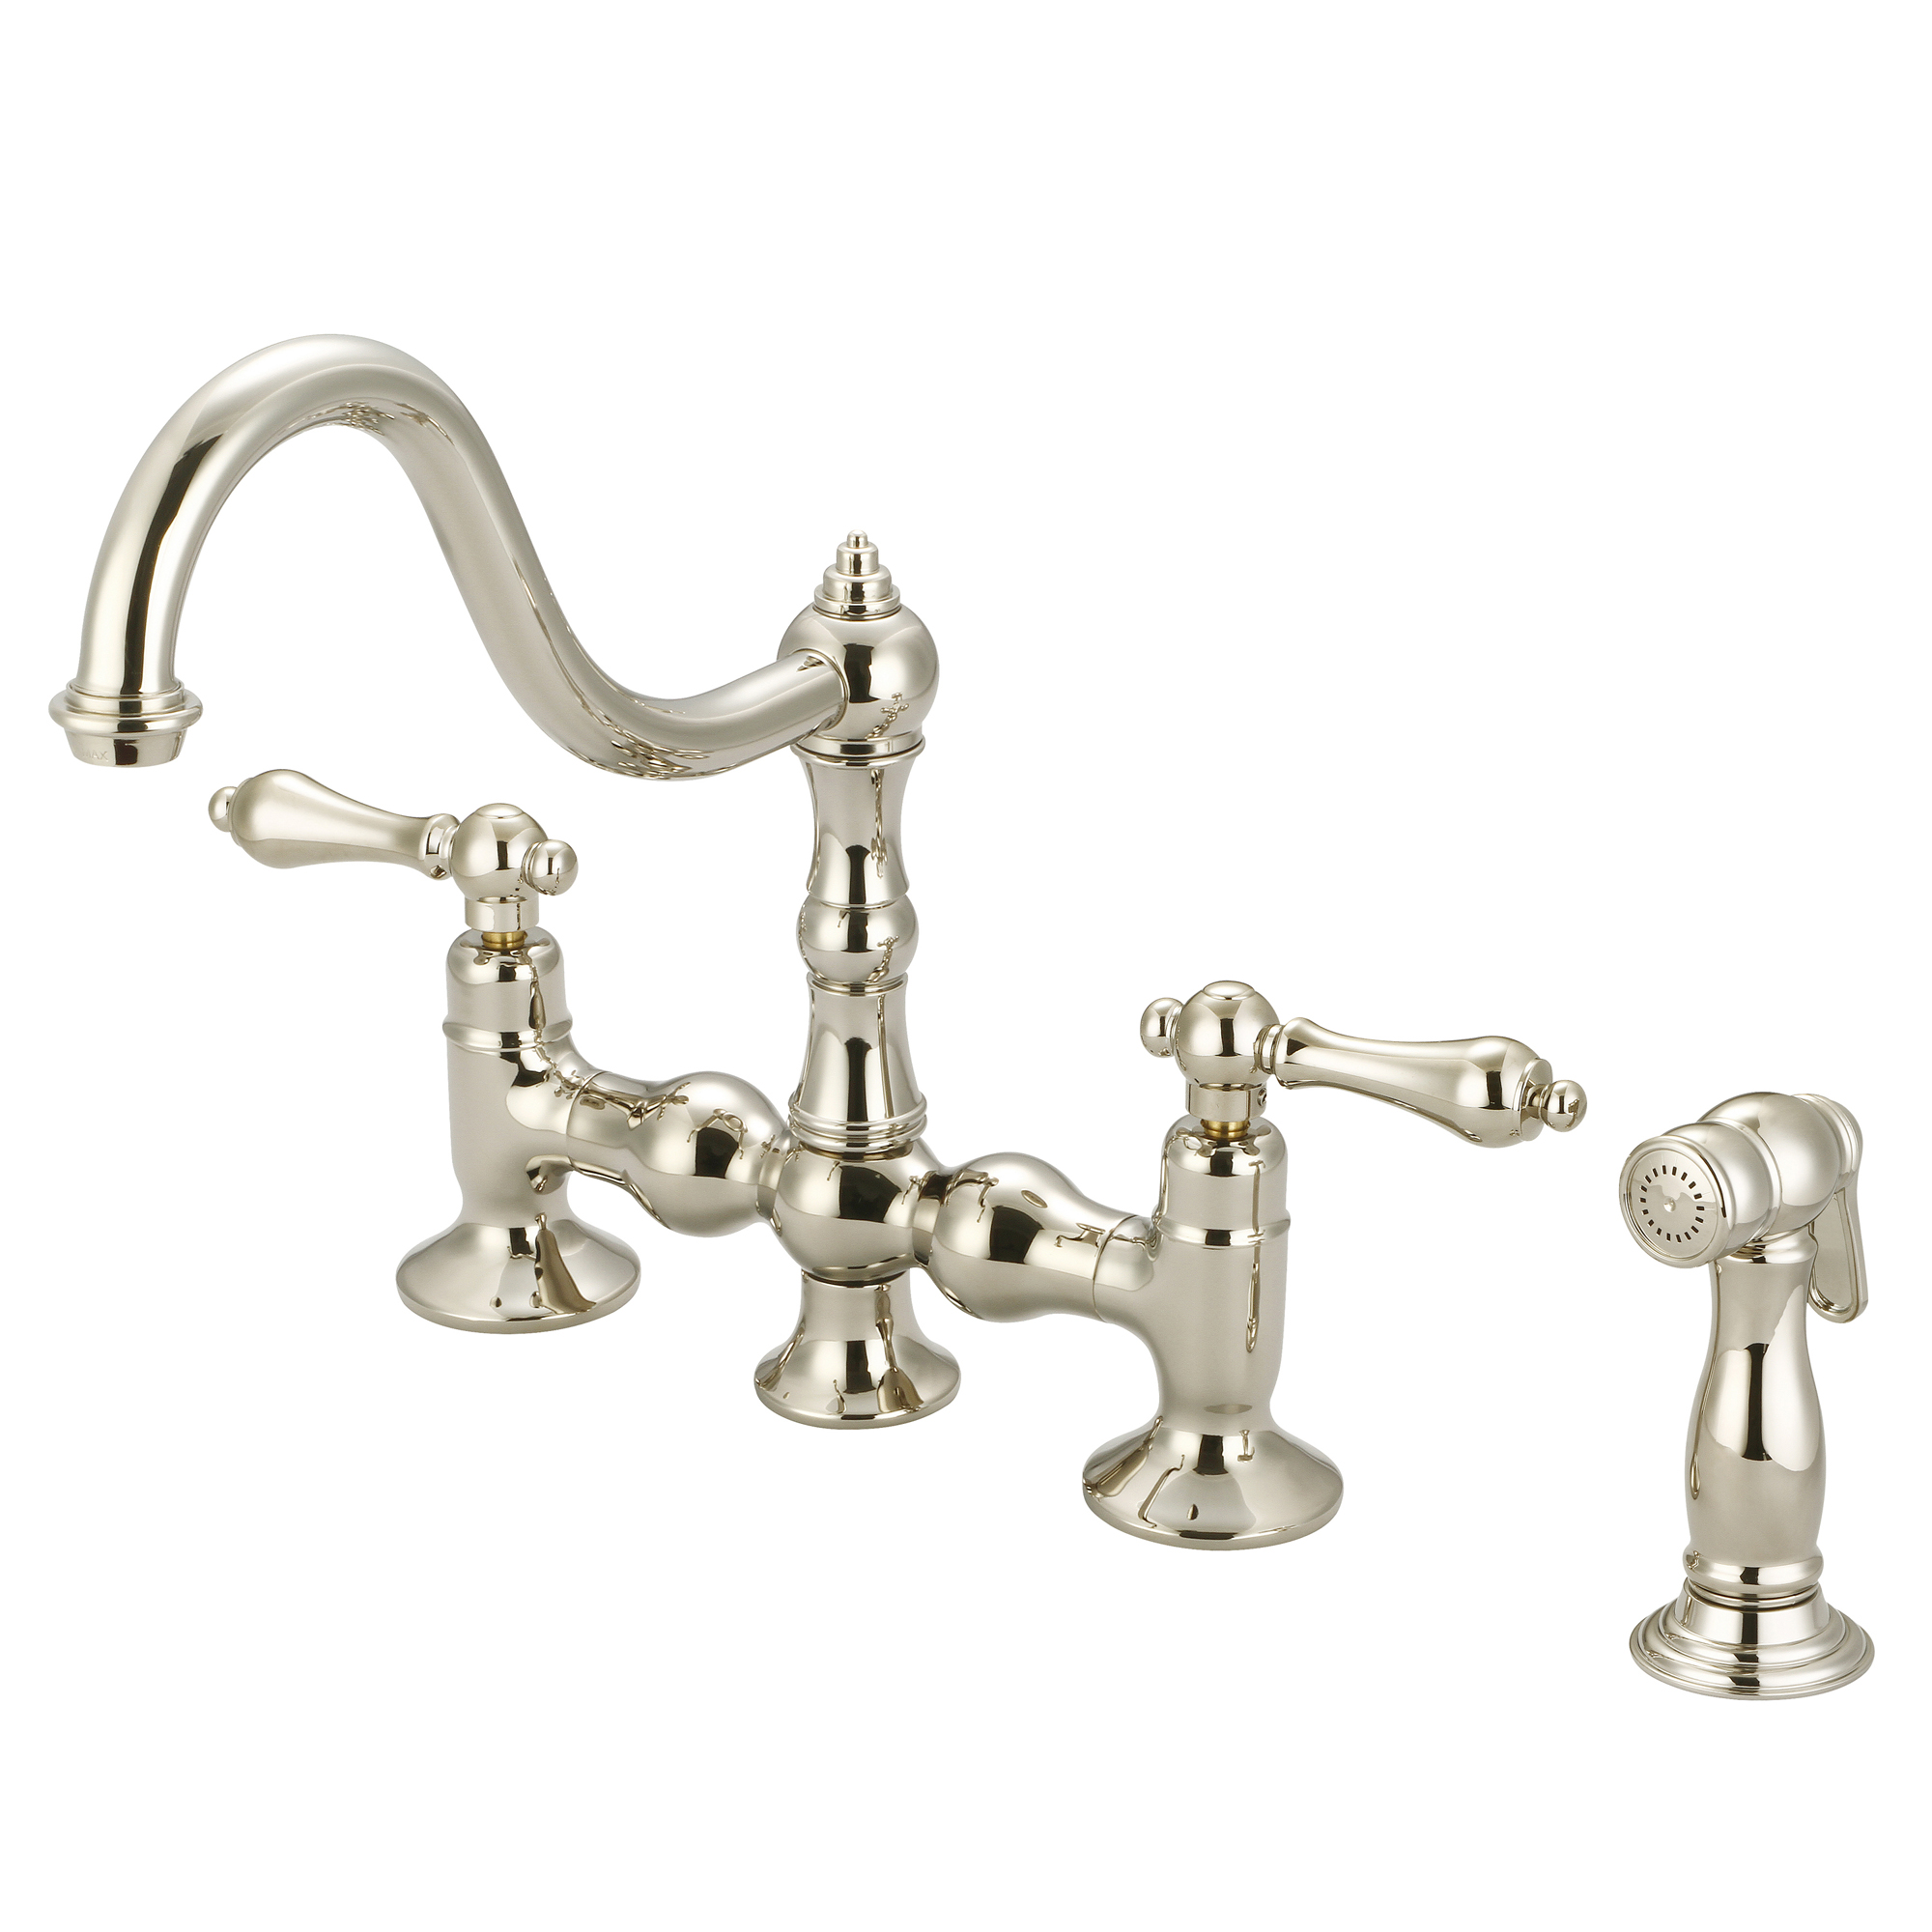 Bridge Style Kitchen Faucet With Side Spray To Match in Polished Nickel (PVD) Finish With Metal Lever Handles Without Labels